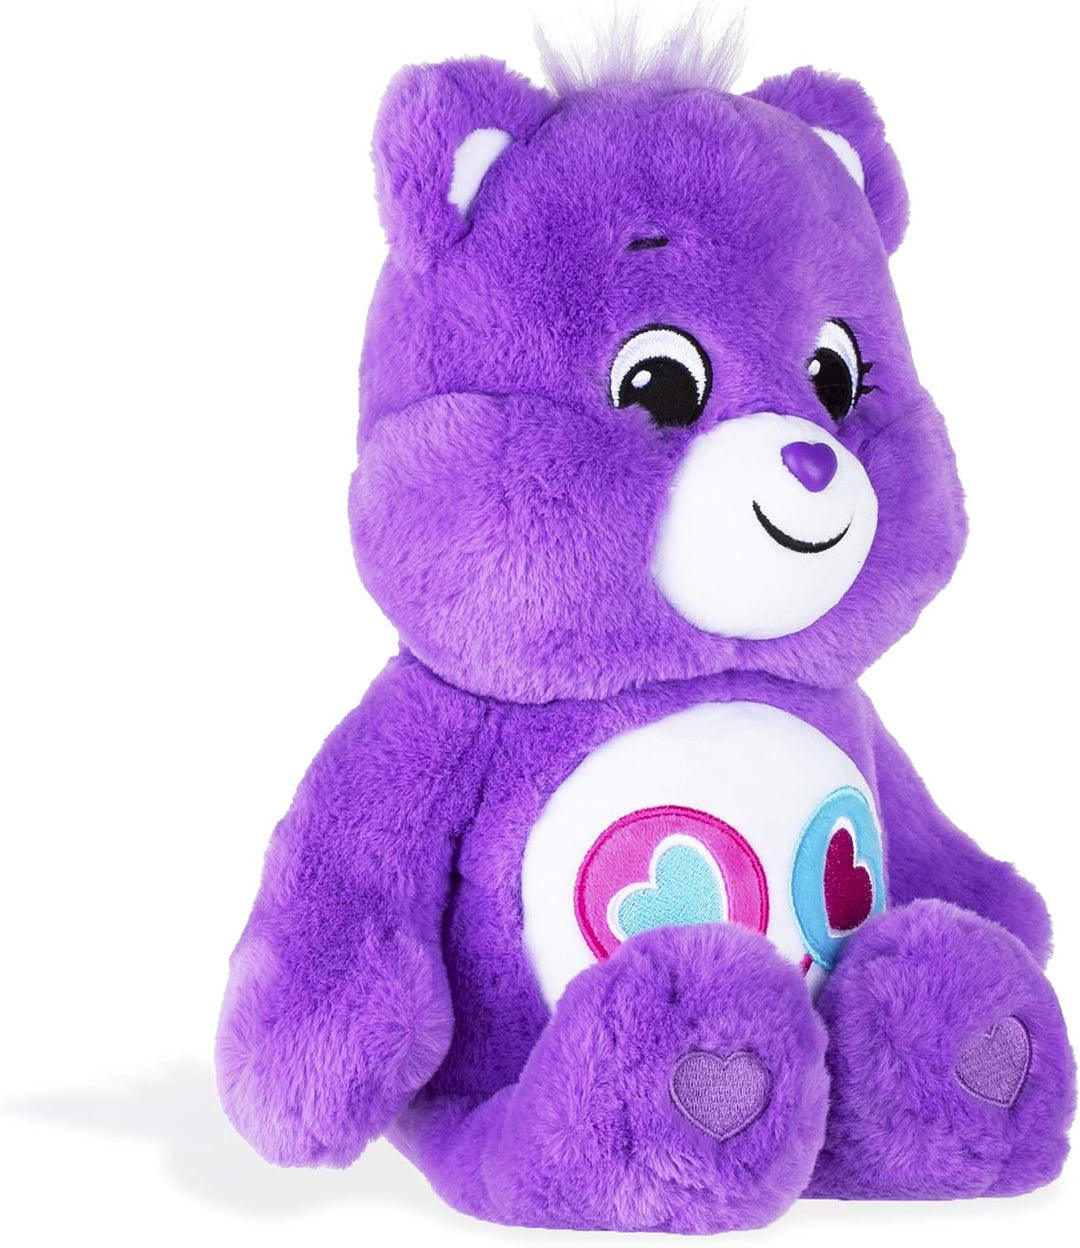 Care Bears 22063 14 Inch Medium Plush Share Bear, Collectable Cute Plush Toy, Cuddly Toys for Children, Soft Toys for Girls and Boys, Cute Teddies Suitable for Girls and Boys Aged 4 Years +